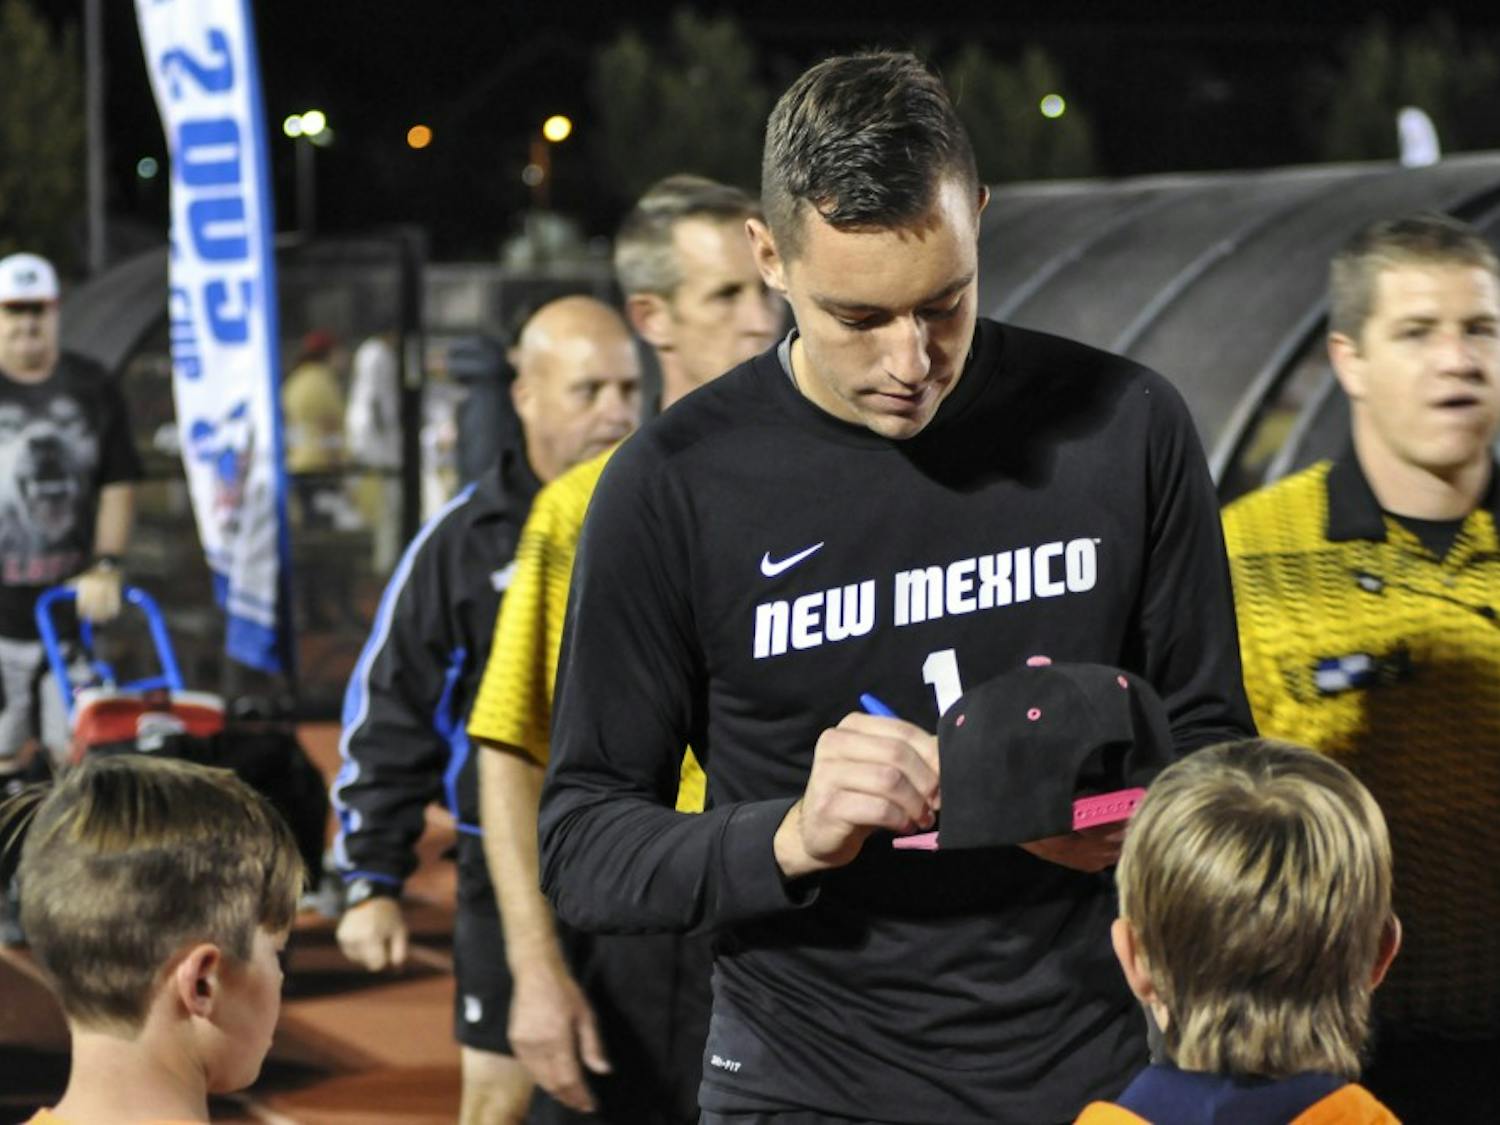 Lobo senior goalkeeper Jason Beaulieu autographs a cap following a game against the University of Denver Pioneers on Oct. 25, 2017. The game ended in a 0-0 draw and included two overtime periods.